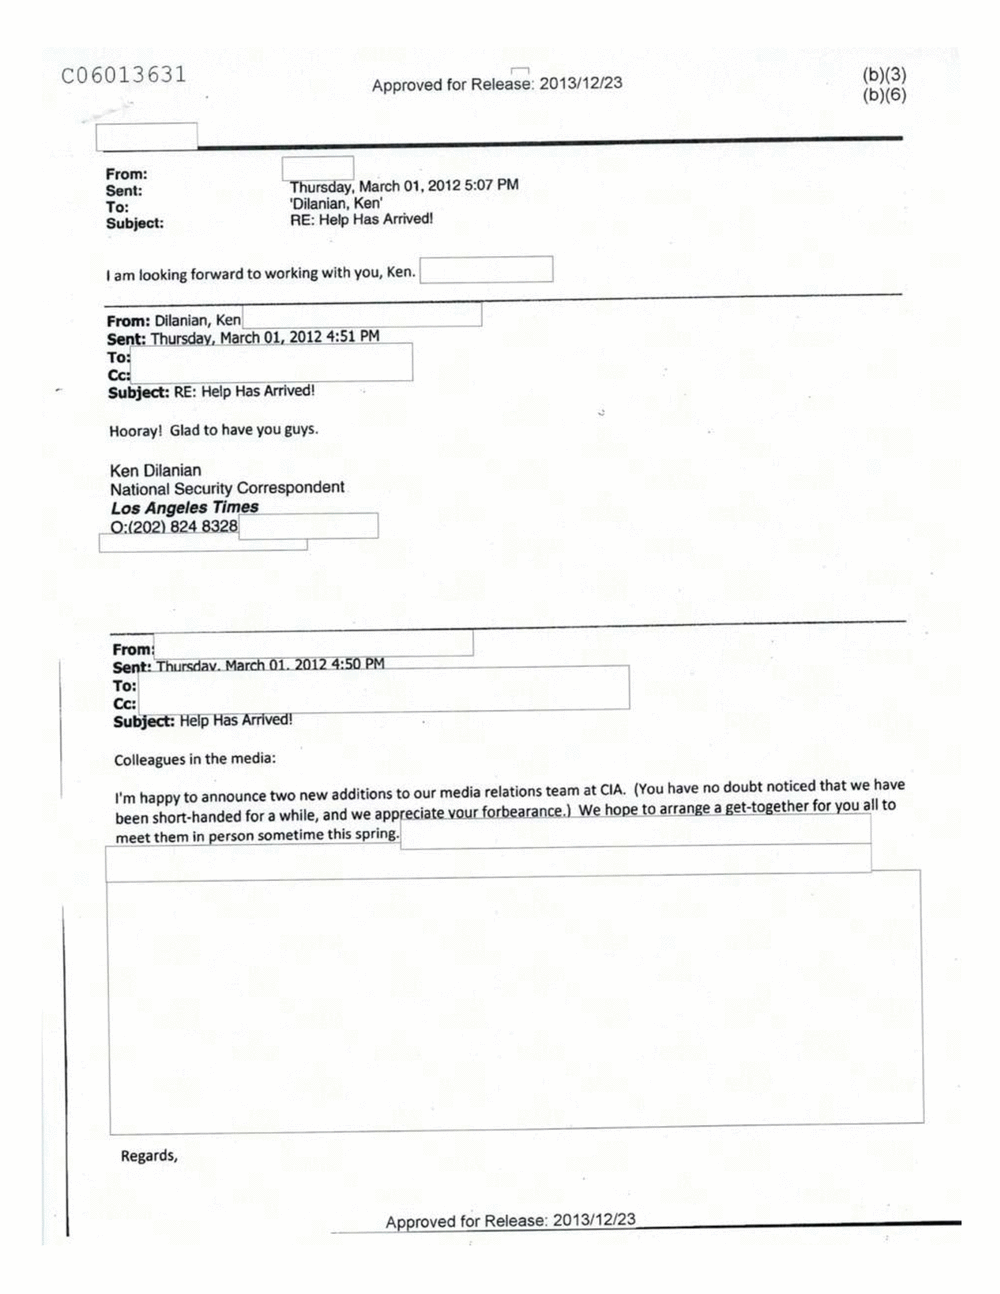 Page 467 from Email Correspondence Between Reporters and CIA Flacks